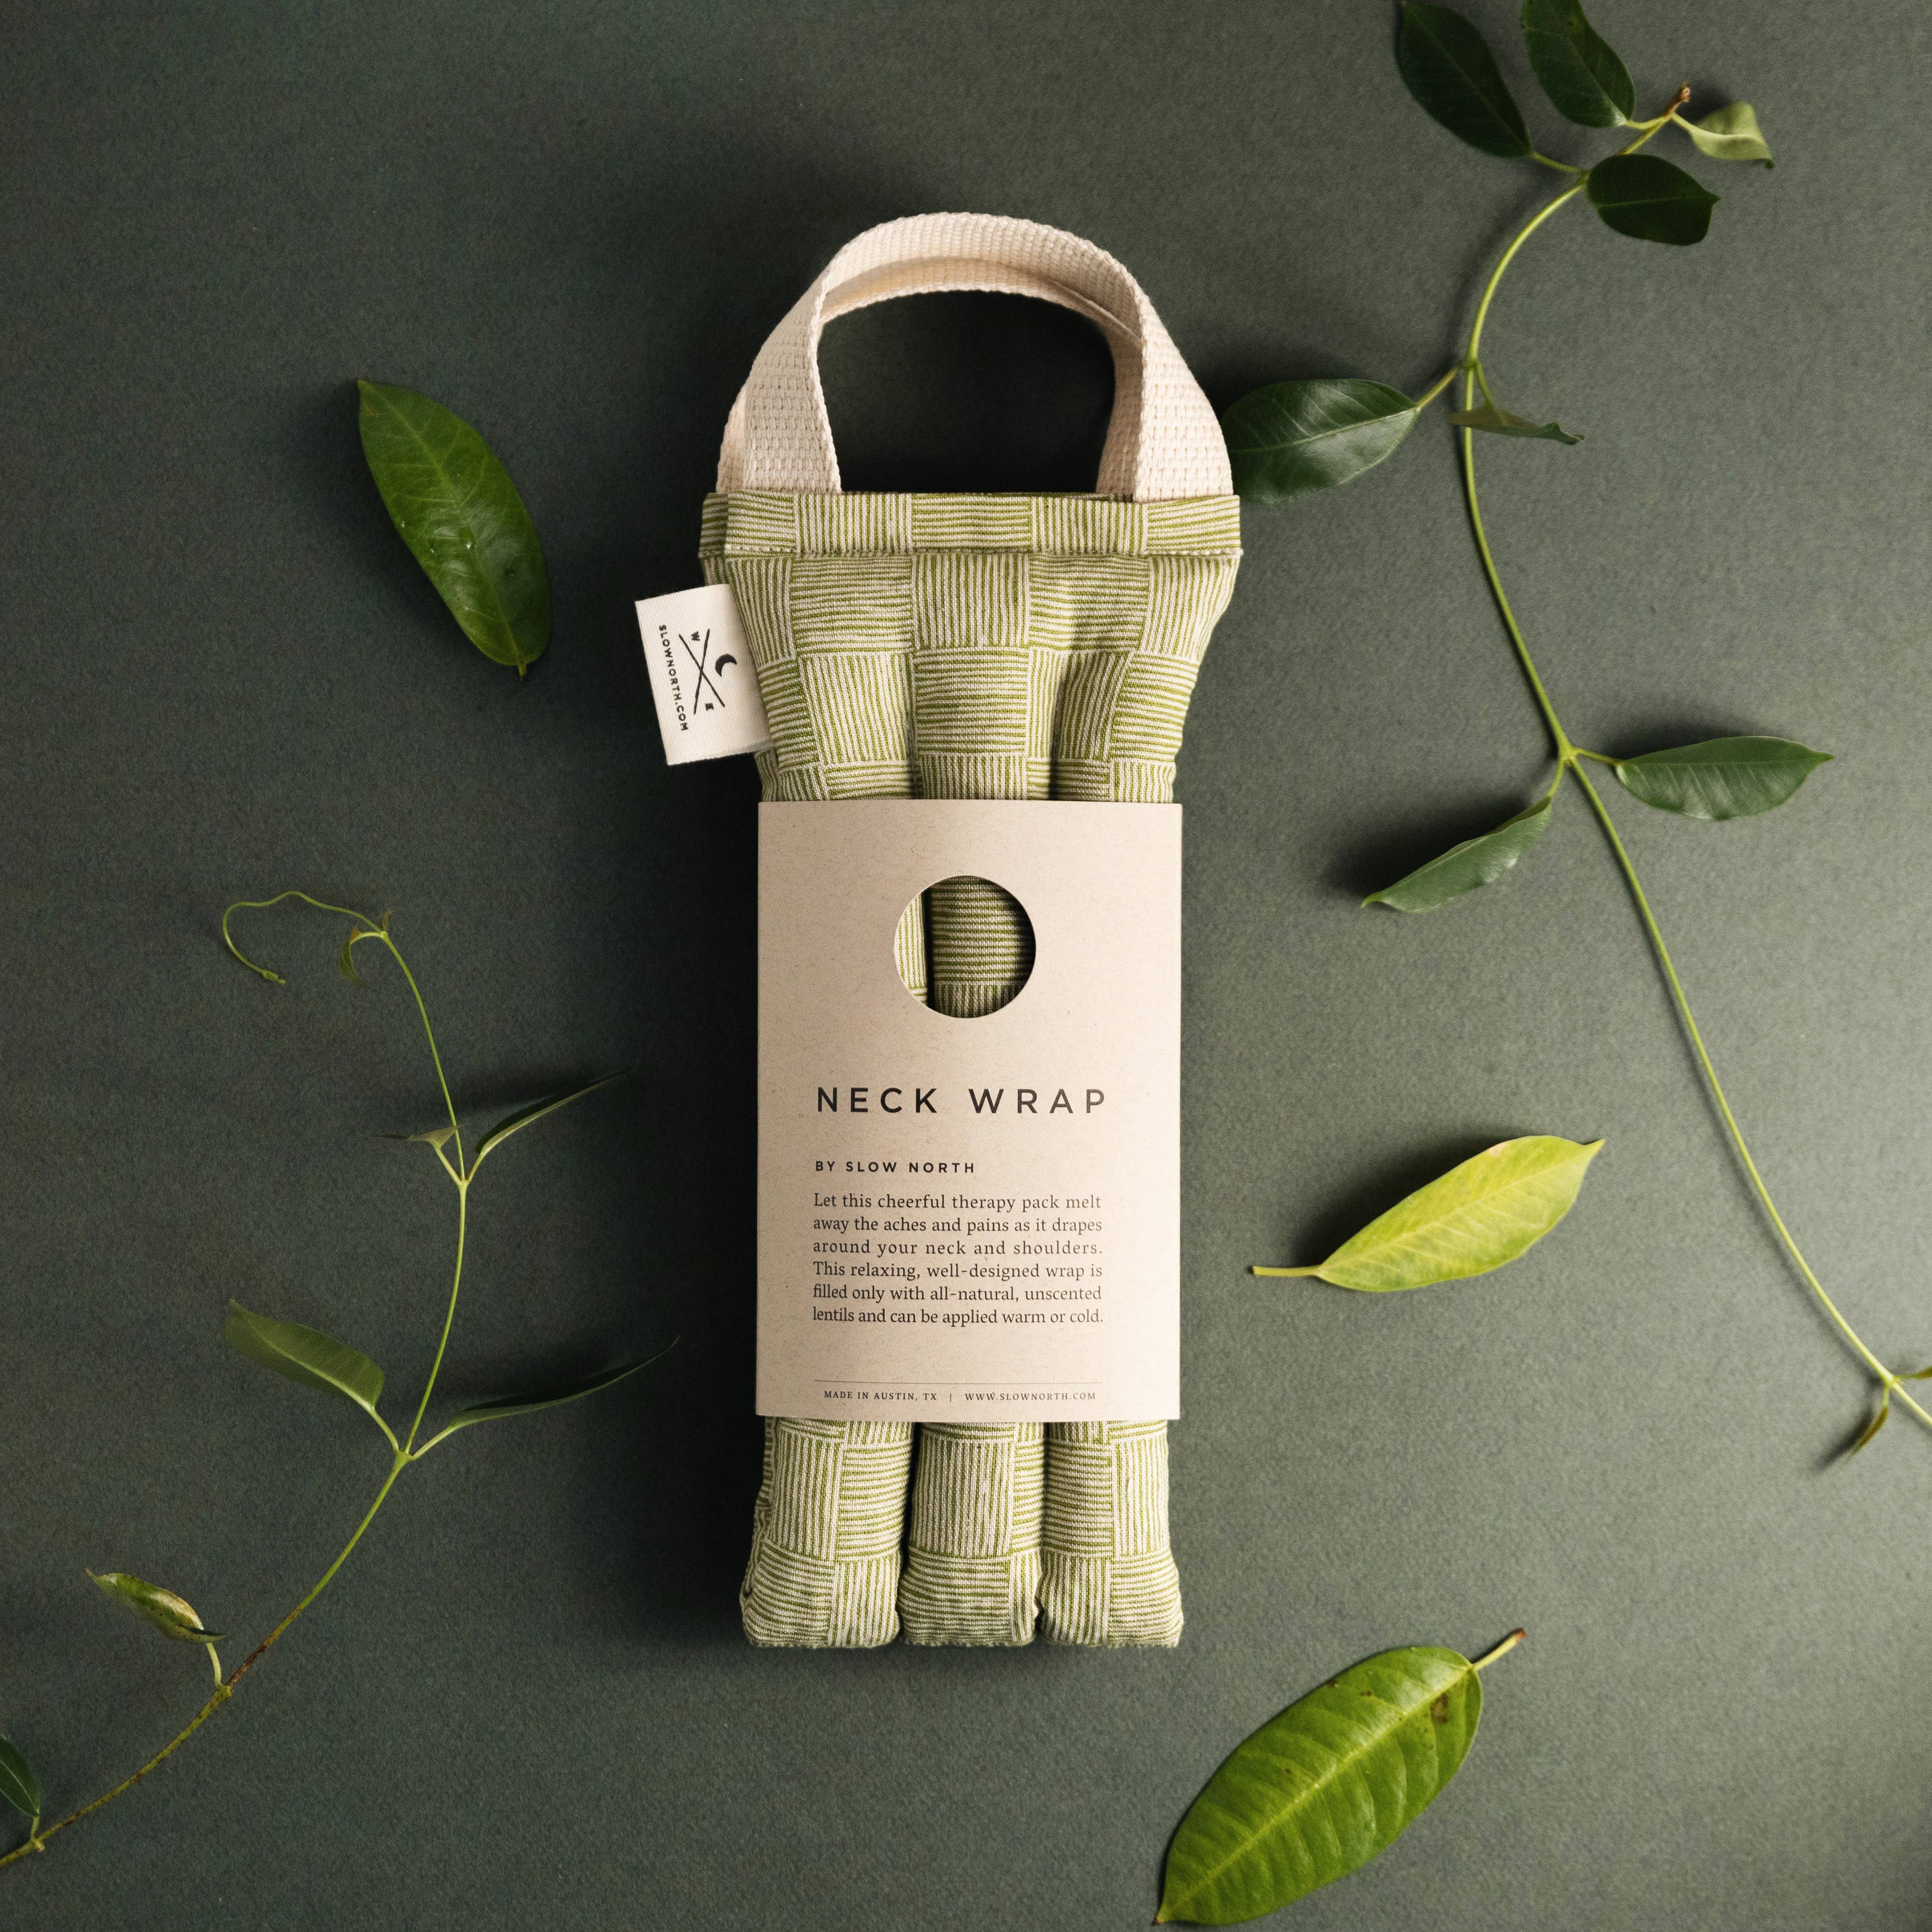 Neck Wrap Therapy Pack: Greenhouse